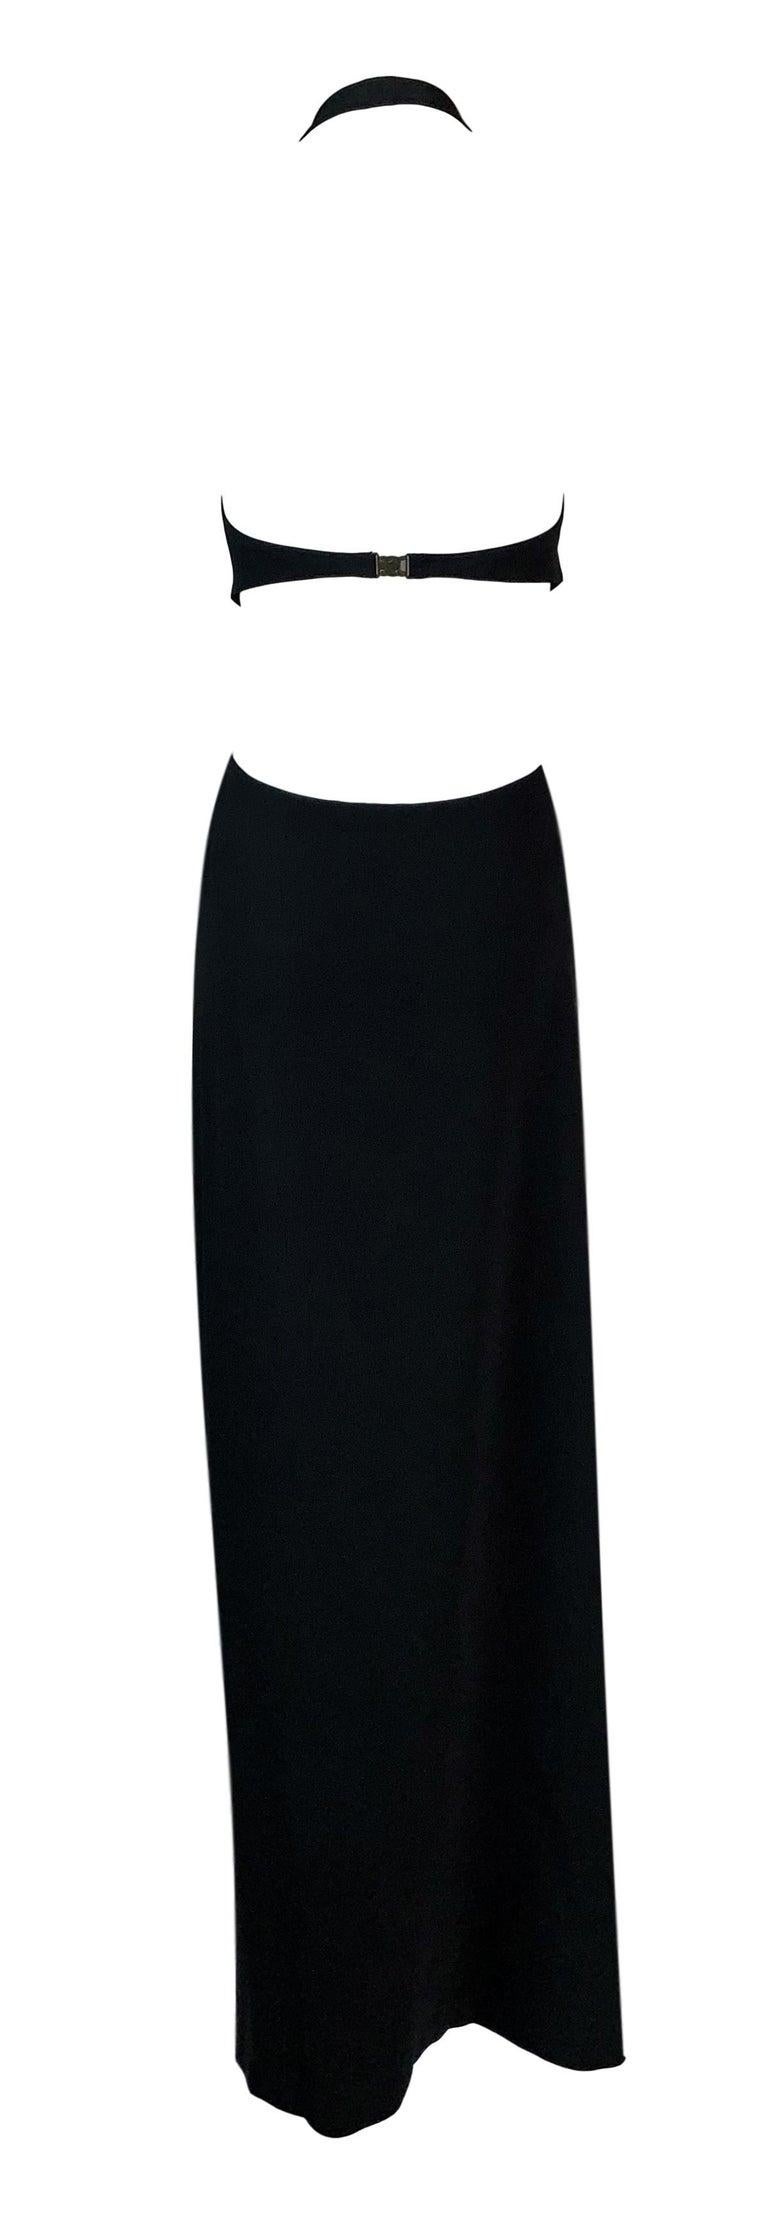 S/S 2004 Celine by Michael Kors Long Black Cut-Out Plunging Dress 36 In Good Condition In Yukon, OK